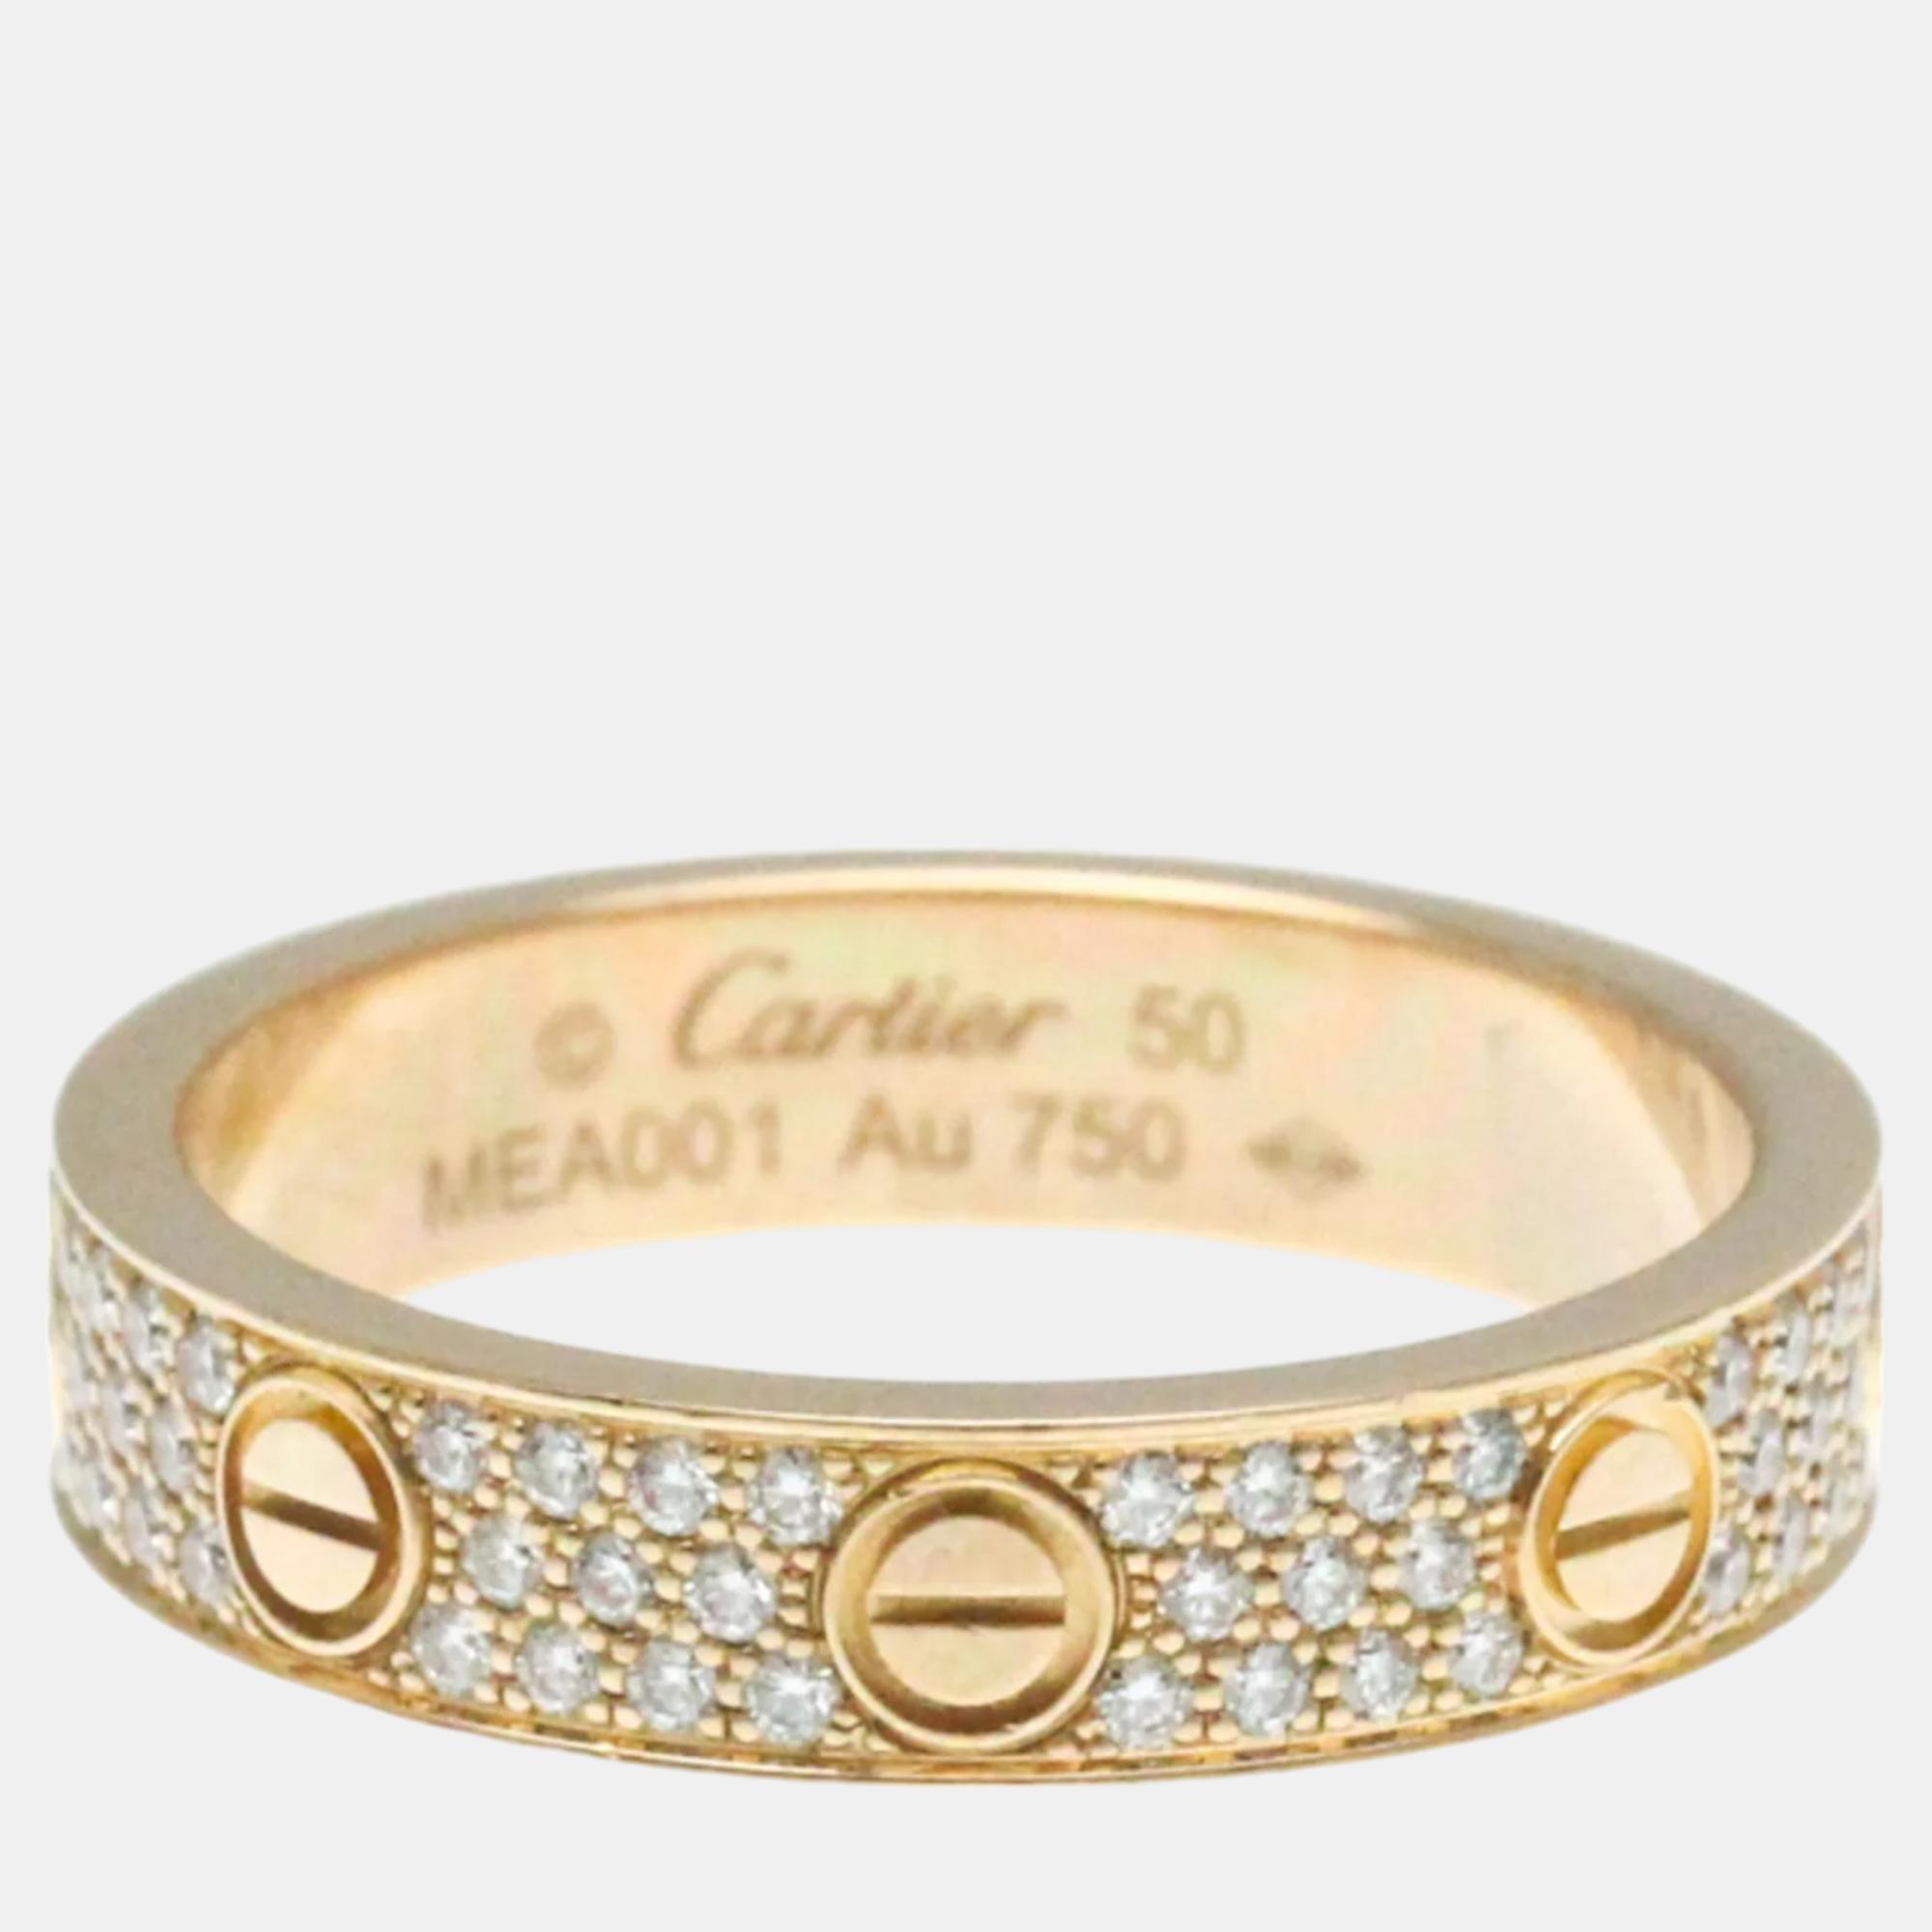 Cartier 18k rose gold and diamond paved love wedding band ring eu 50